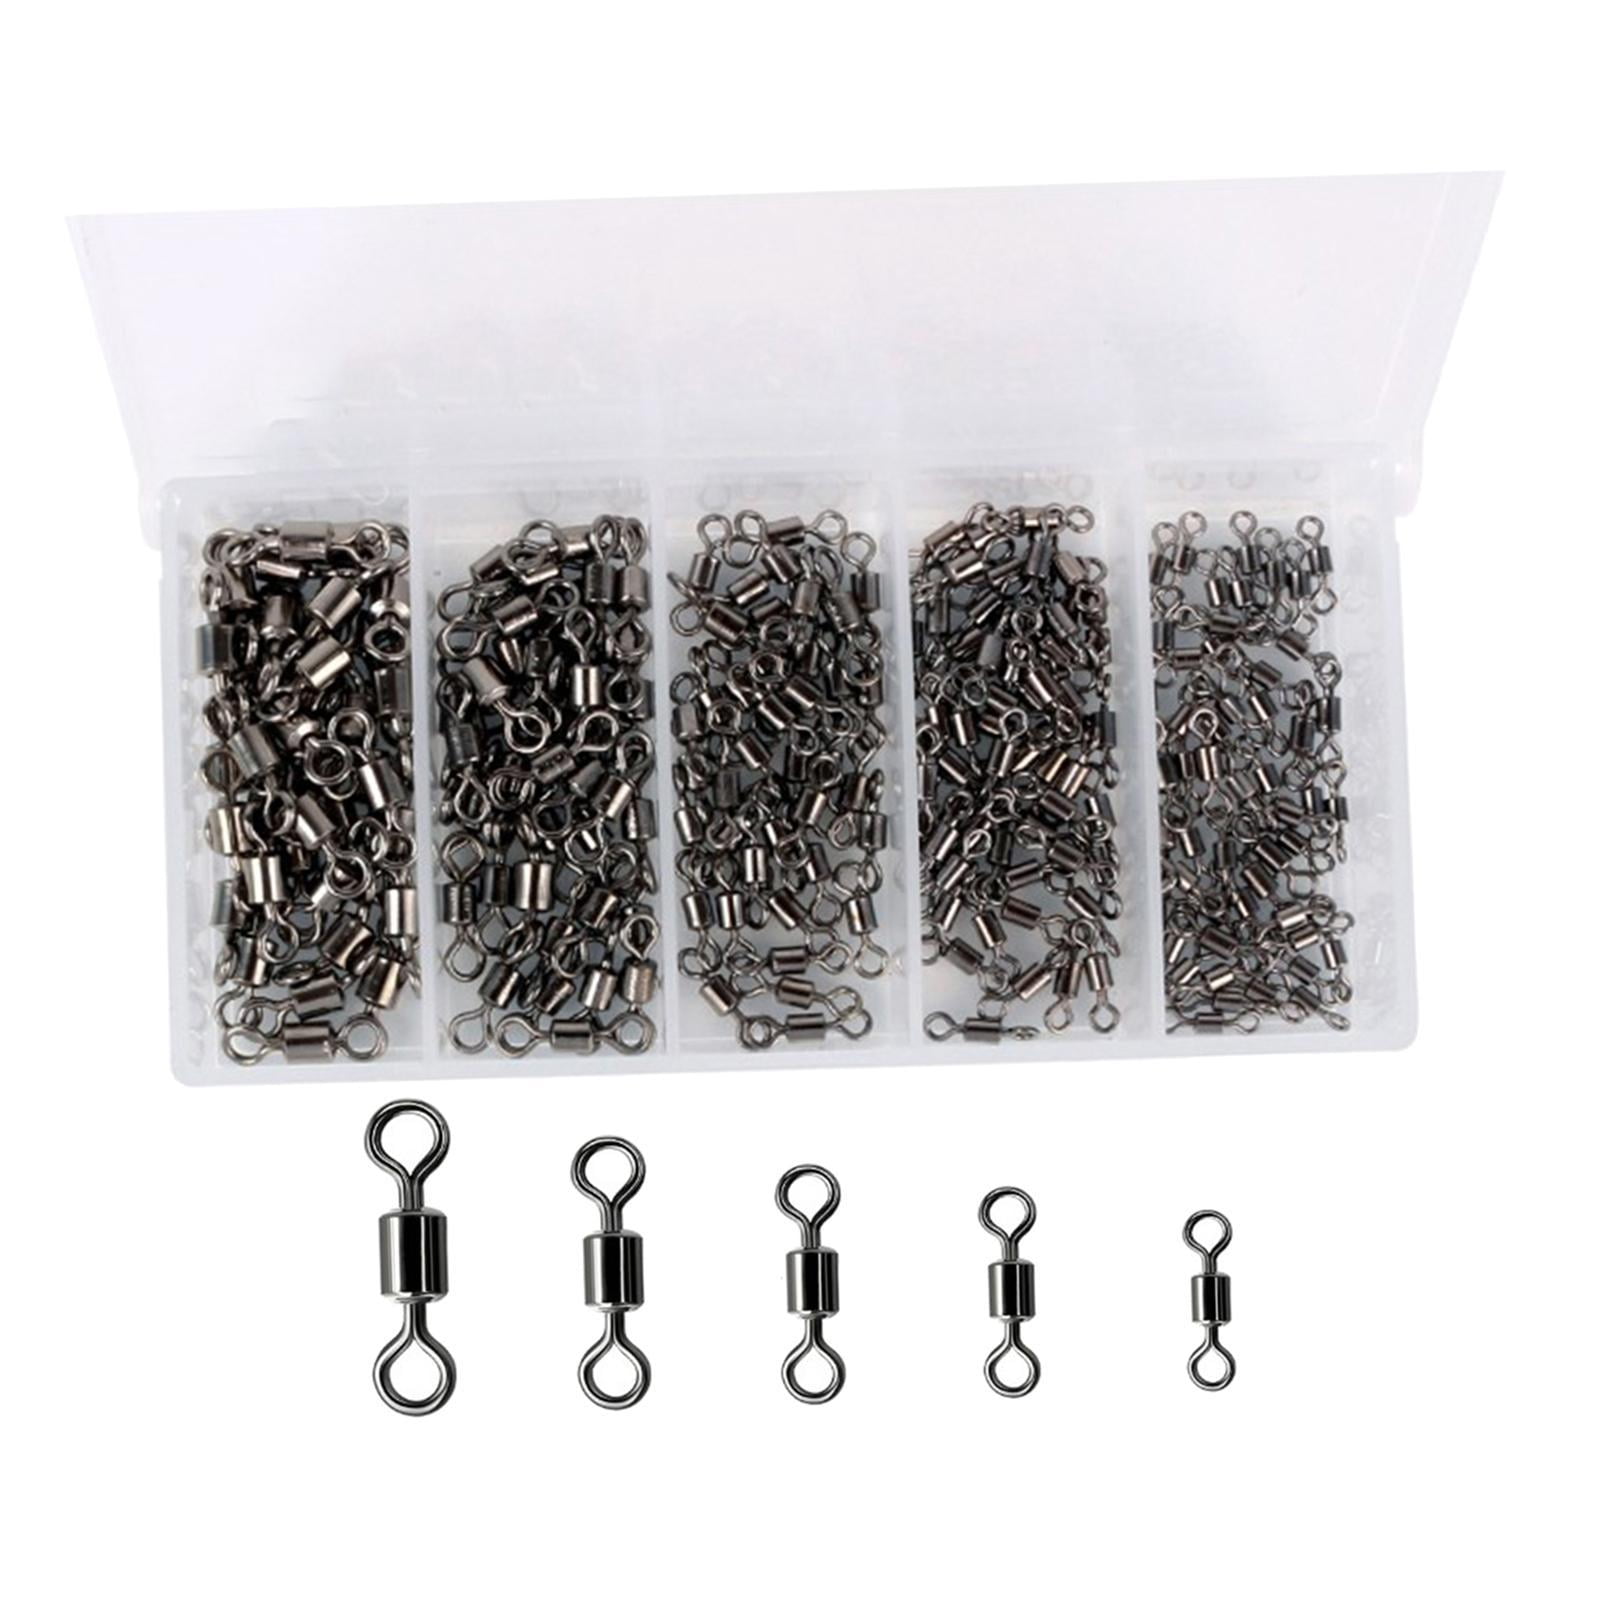 Details about   200pcs Sea Fishing Rig Making Kit With Box Beads Hooks Swivels Snaps Floats Pike 